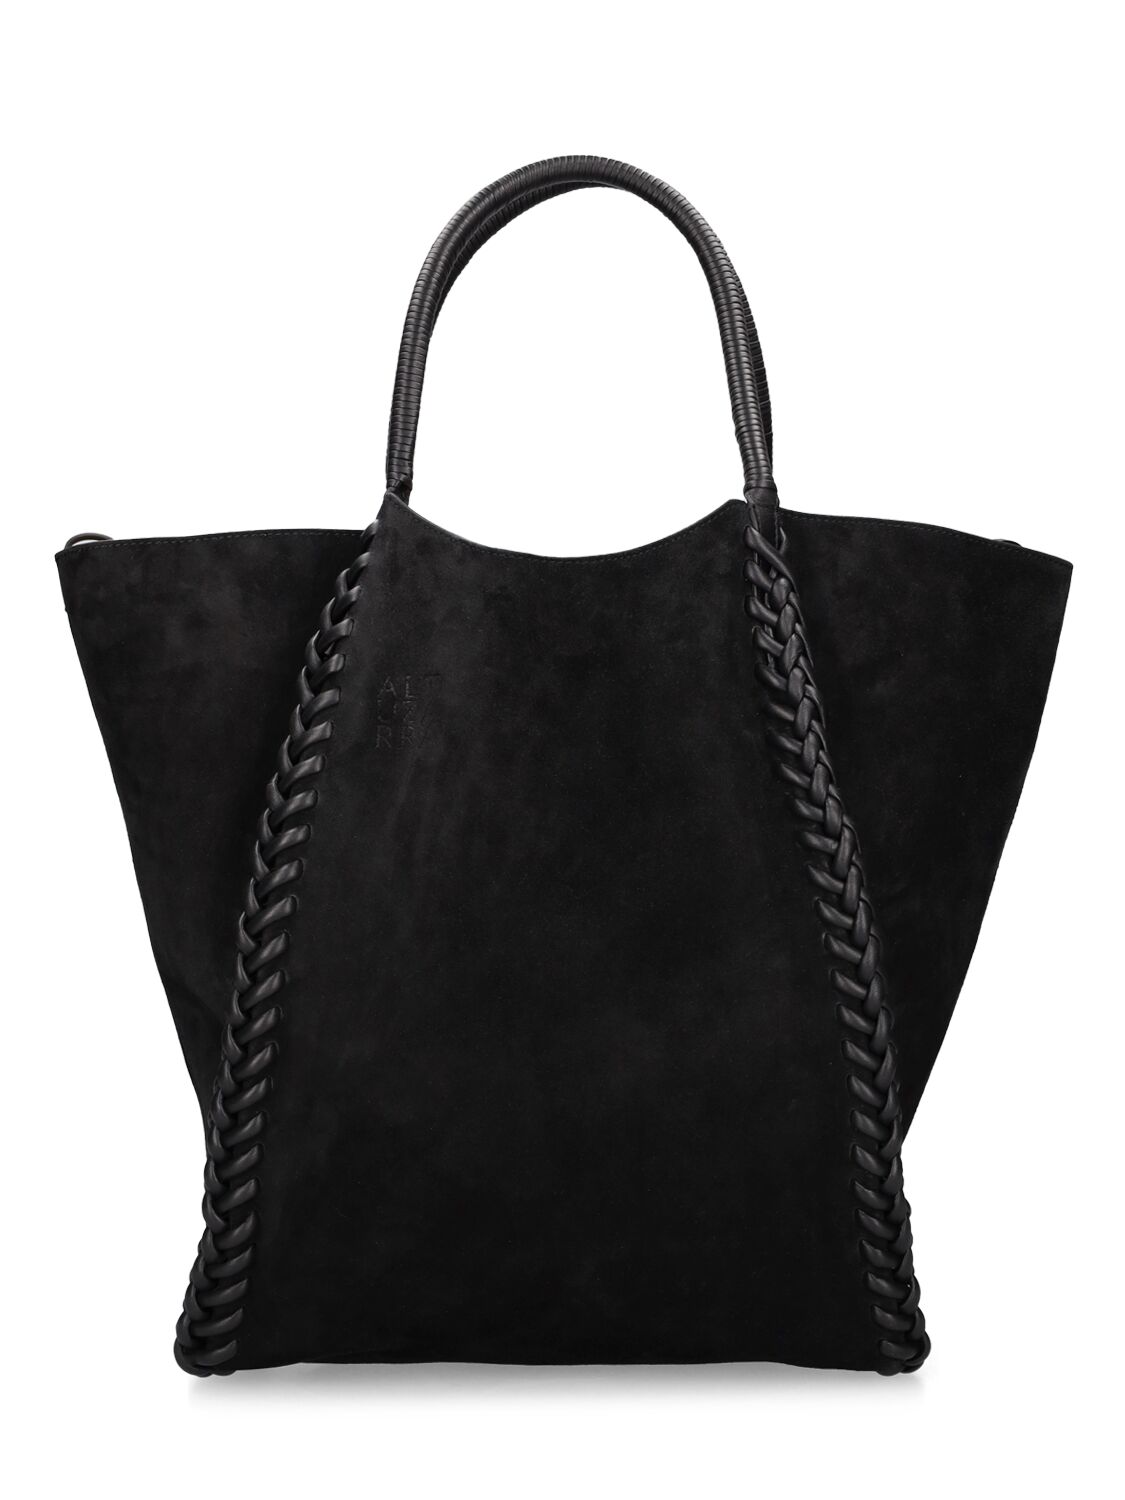 Image of Braided Suede Tote Bag